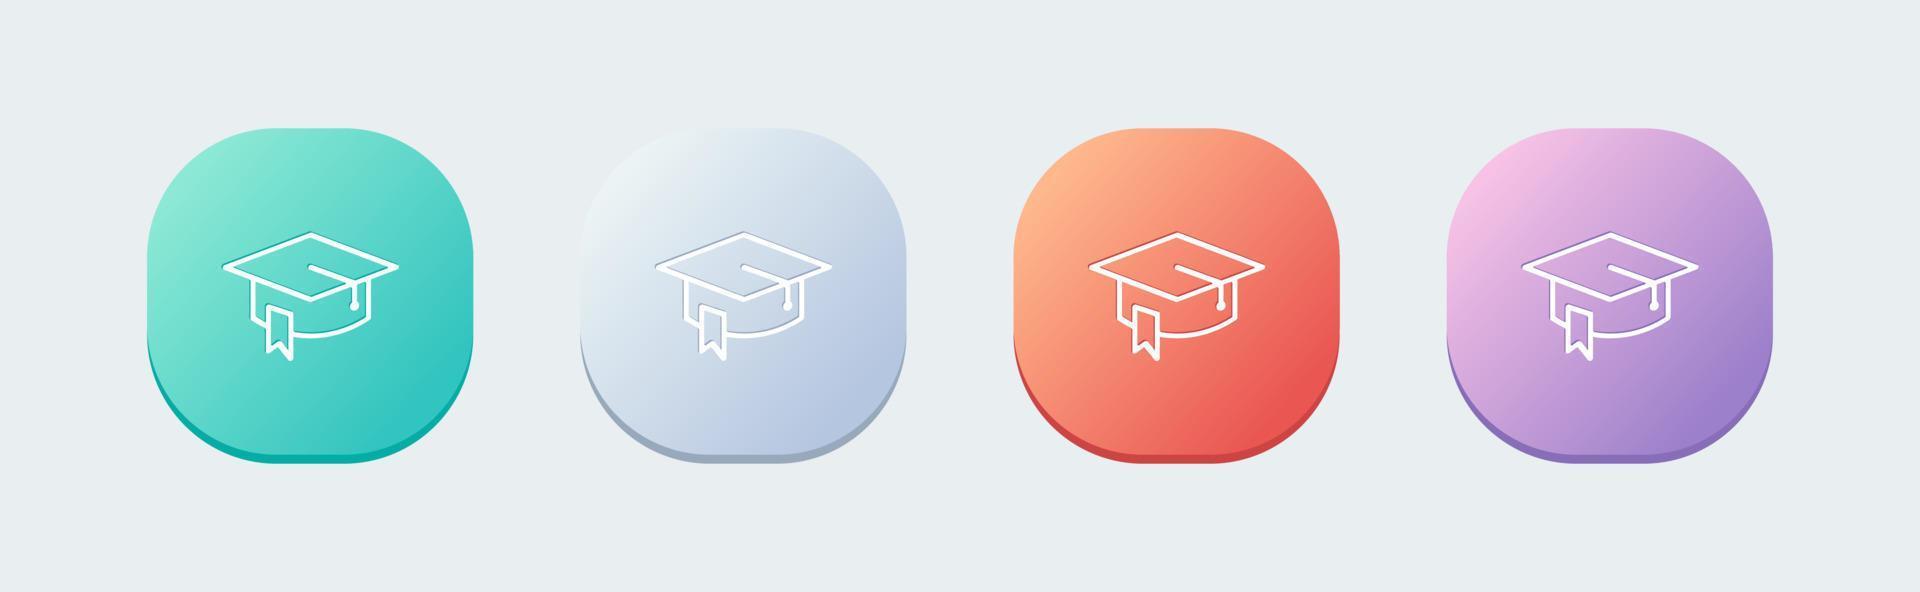 Graduation line icon in flat design style. Education signs vector illustration.